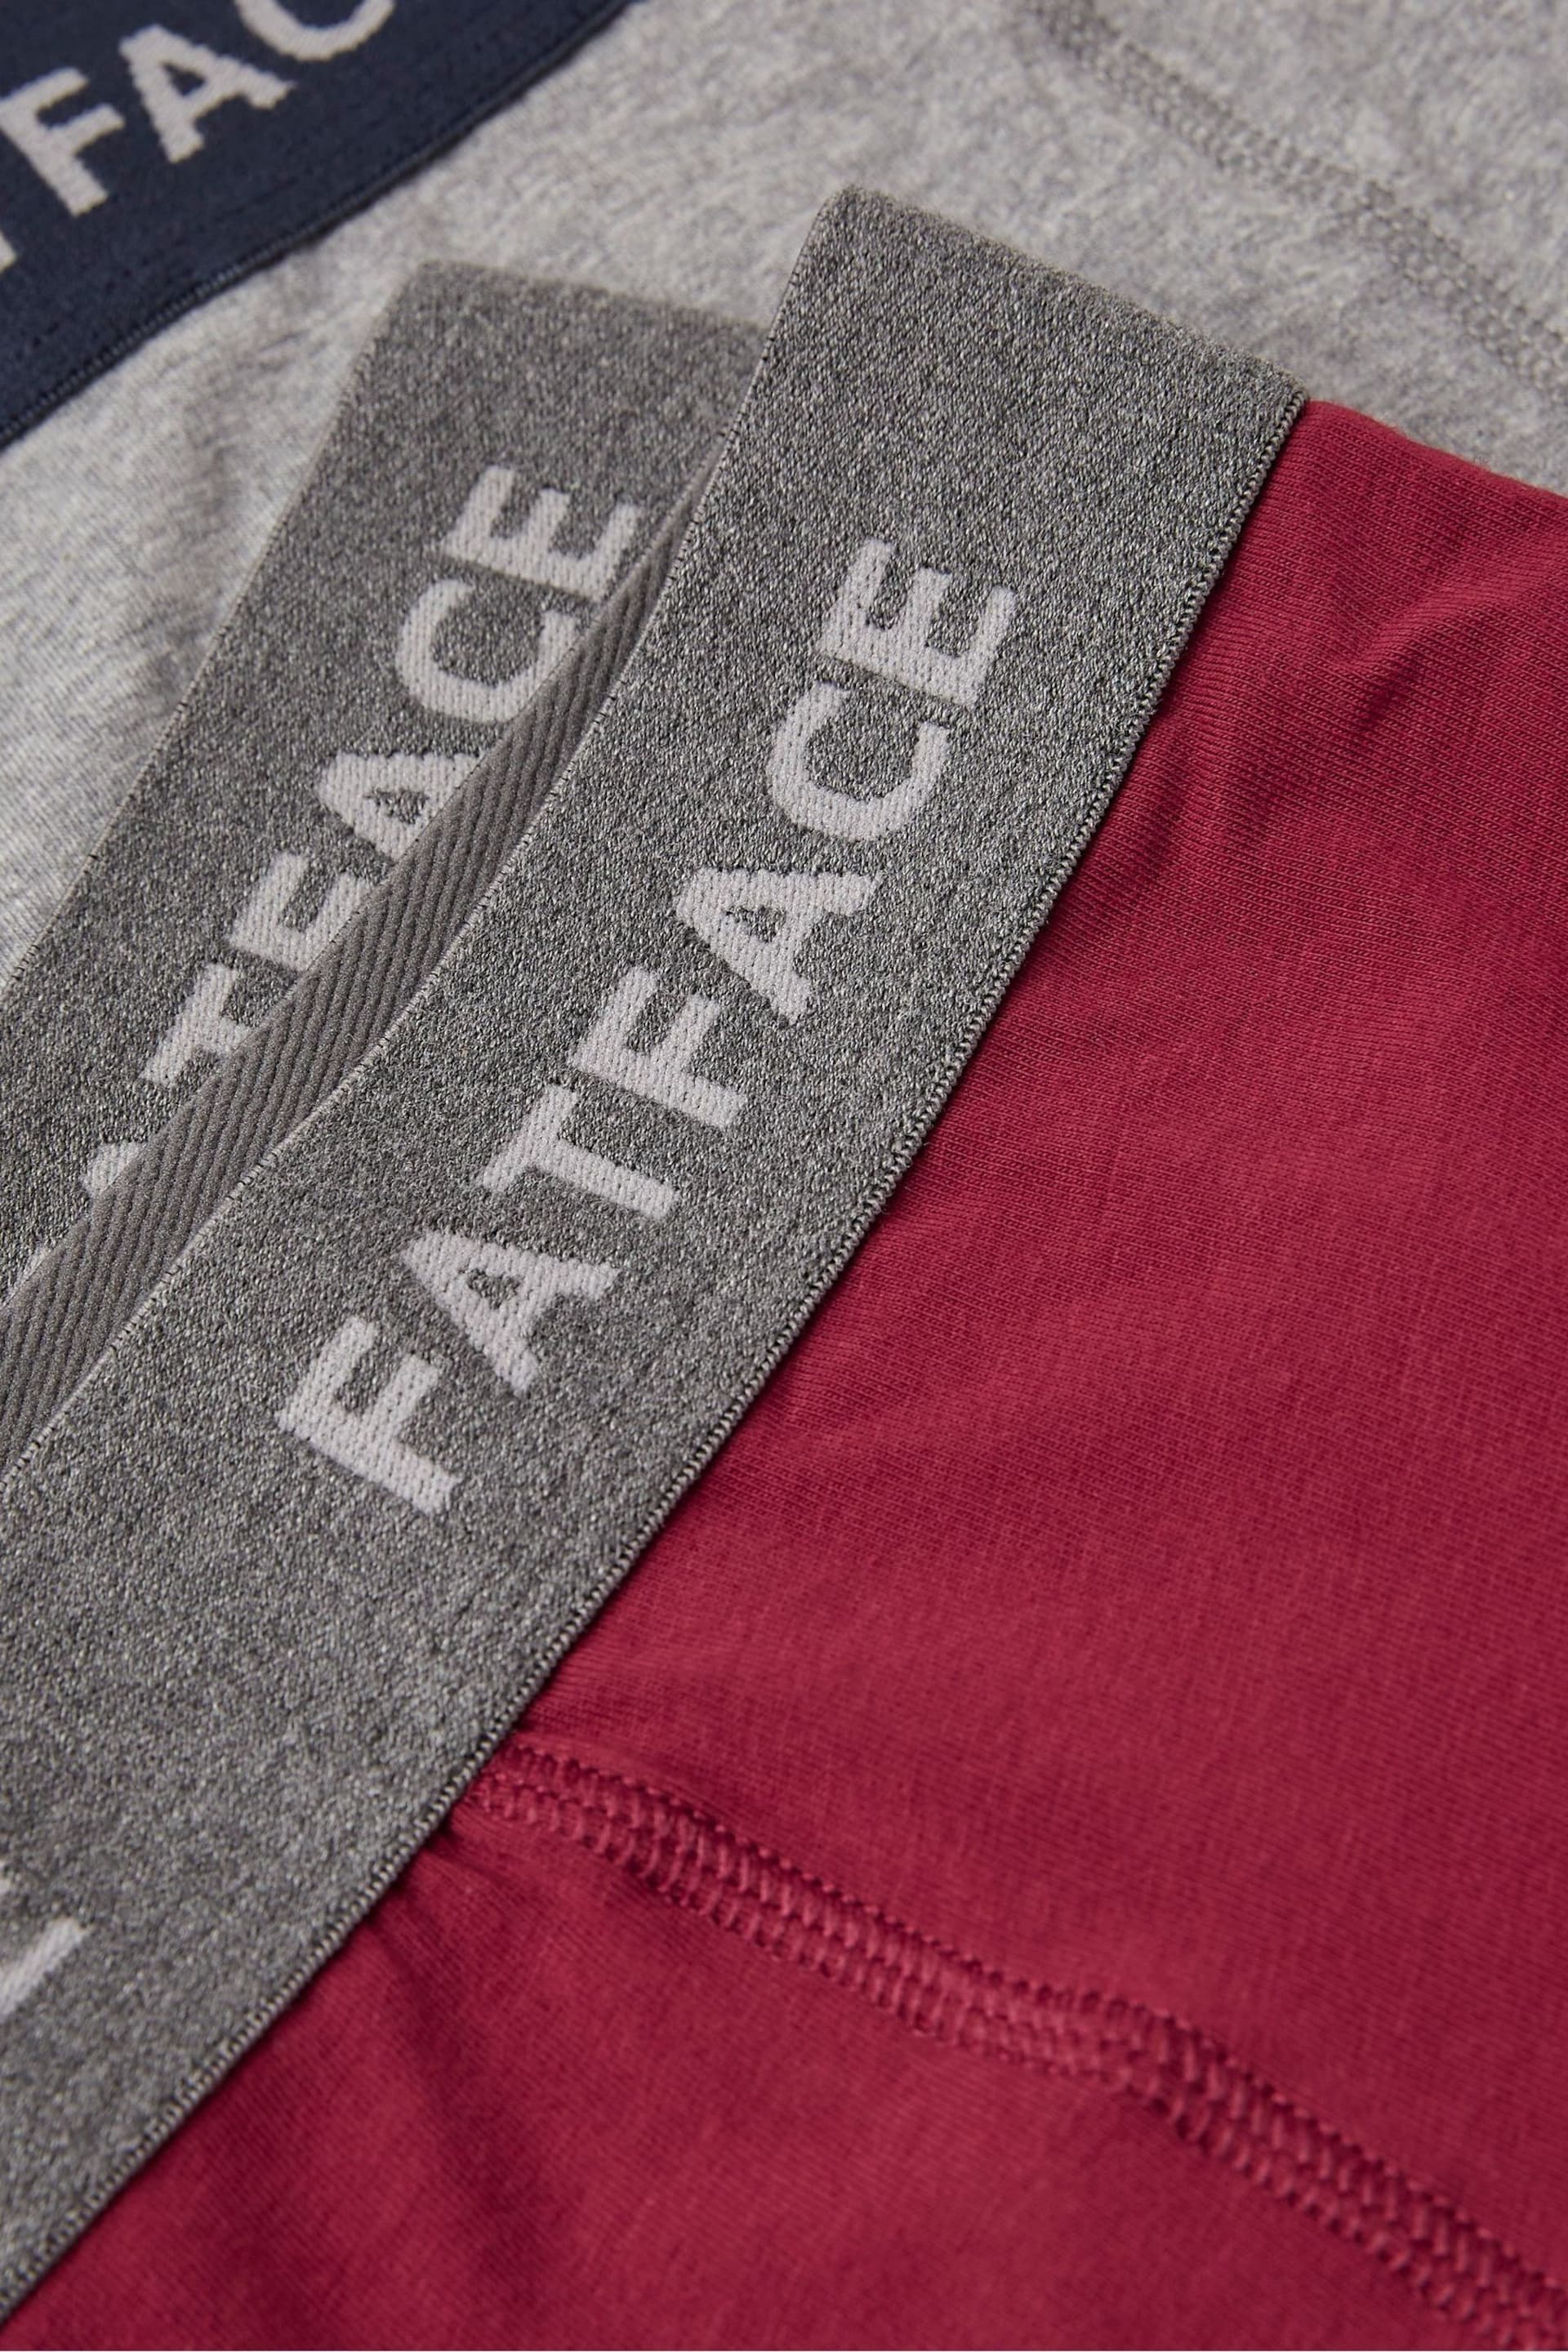 FatFace Burgundy Red Plain Boxers 2 Pack - Image 2 of 2